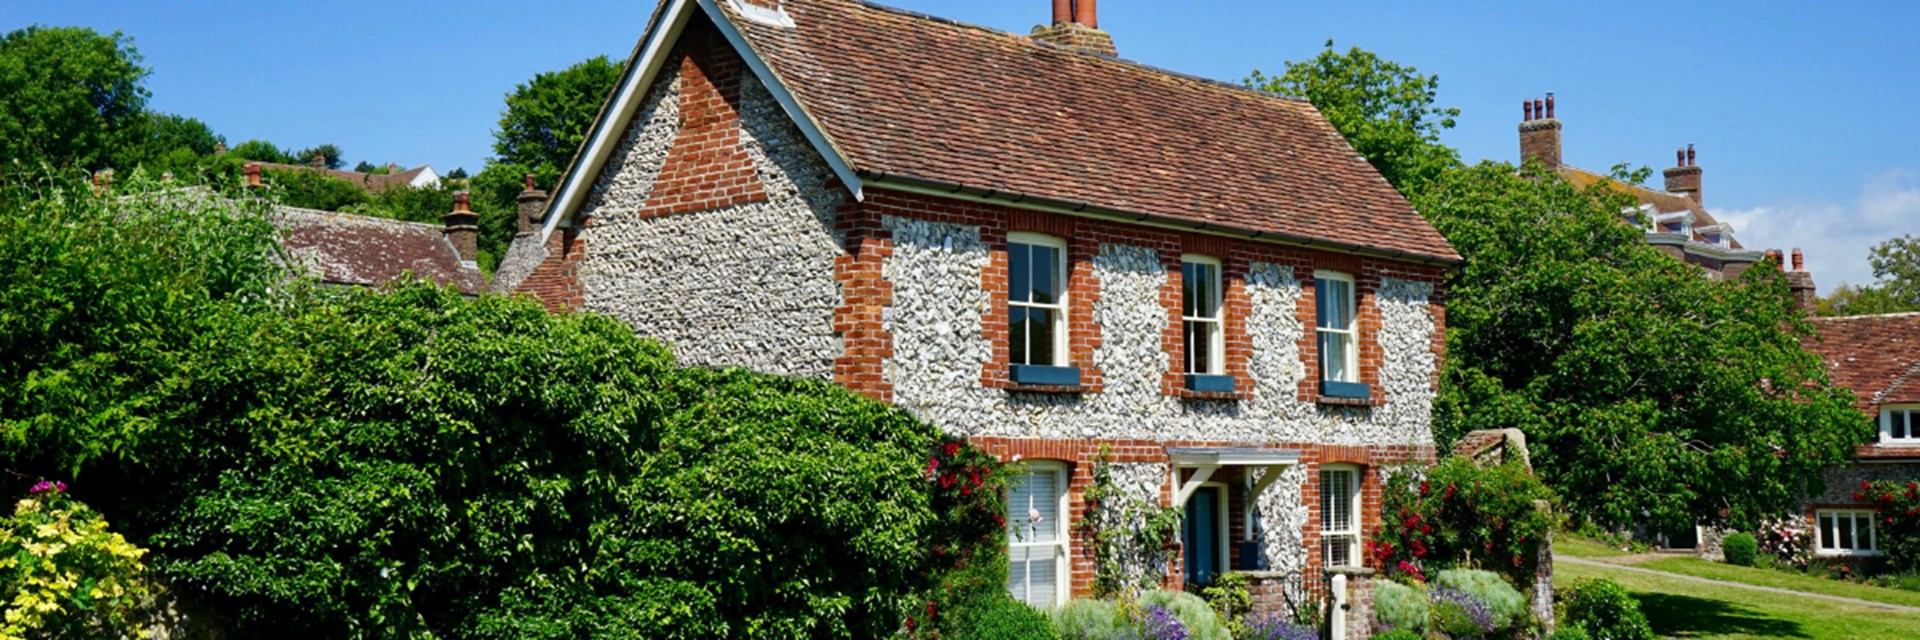 Listed Building Home Insurance